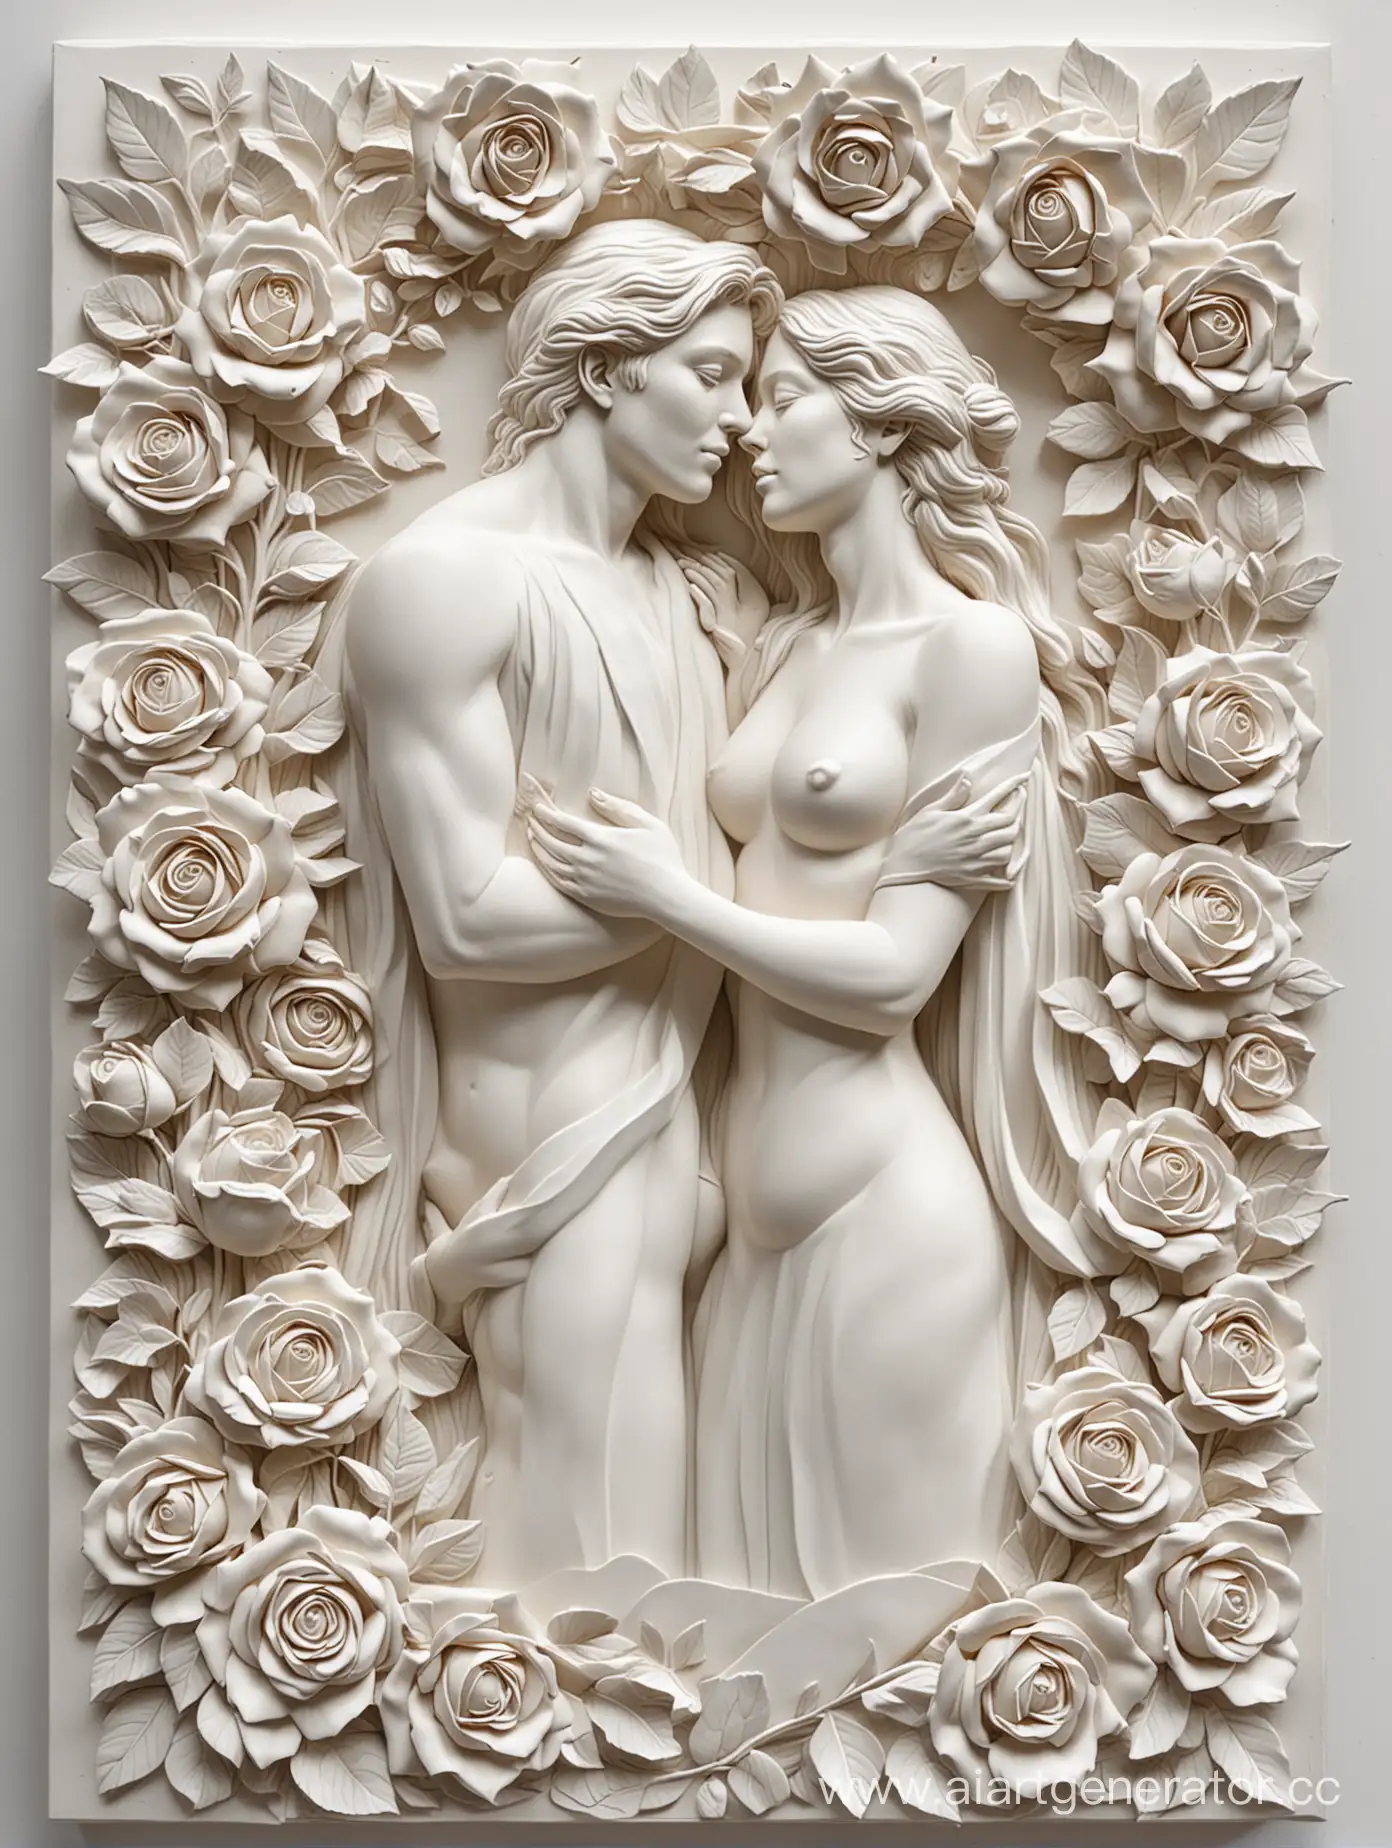 Romantic-White-BasRelief-Sculpture-Woman-and-Man-Amidst-Enormous-Rose-Flowers